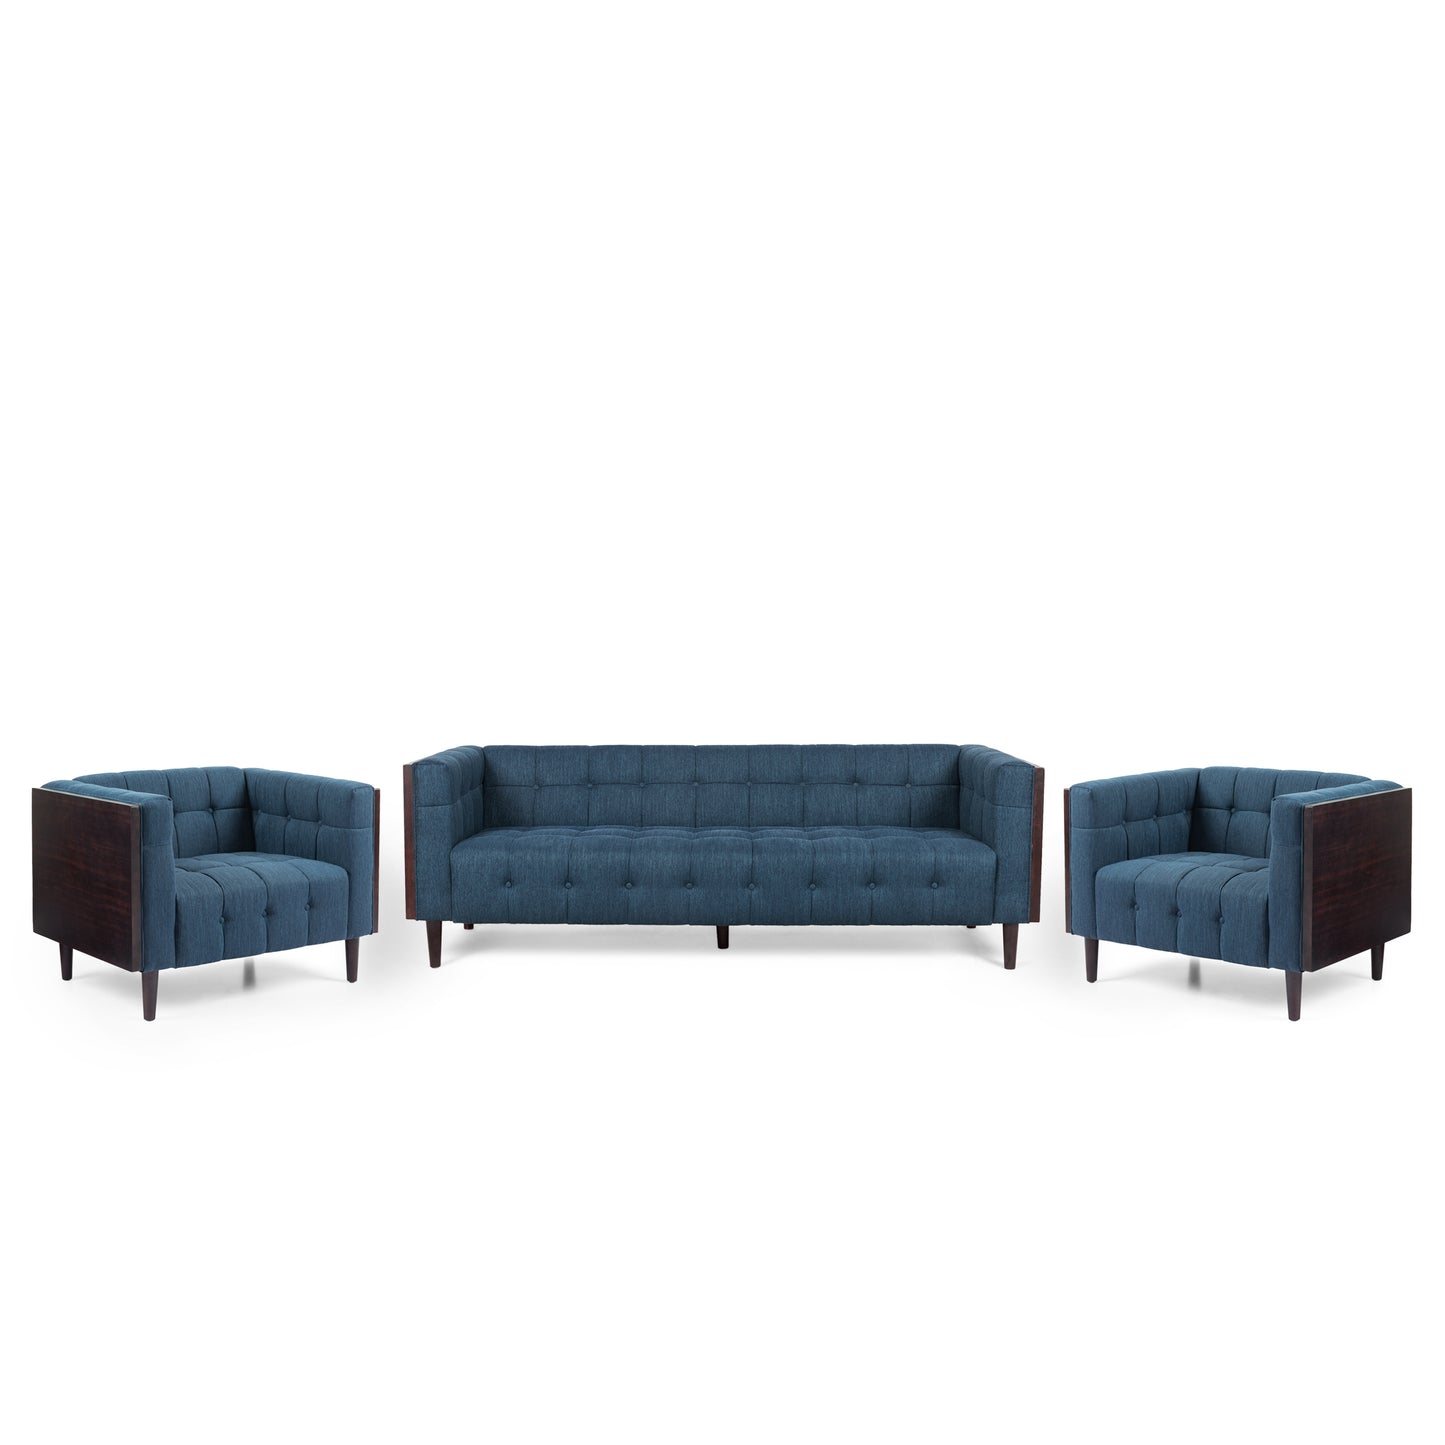 Croton Contemporary Tufted 5 Seater Living Room Set